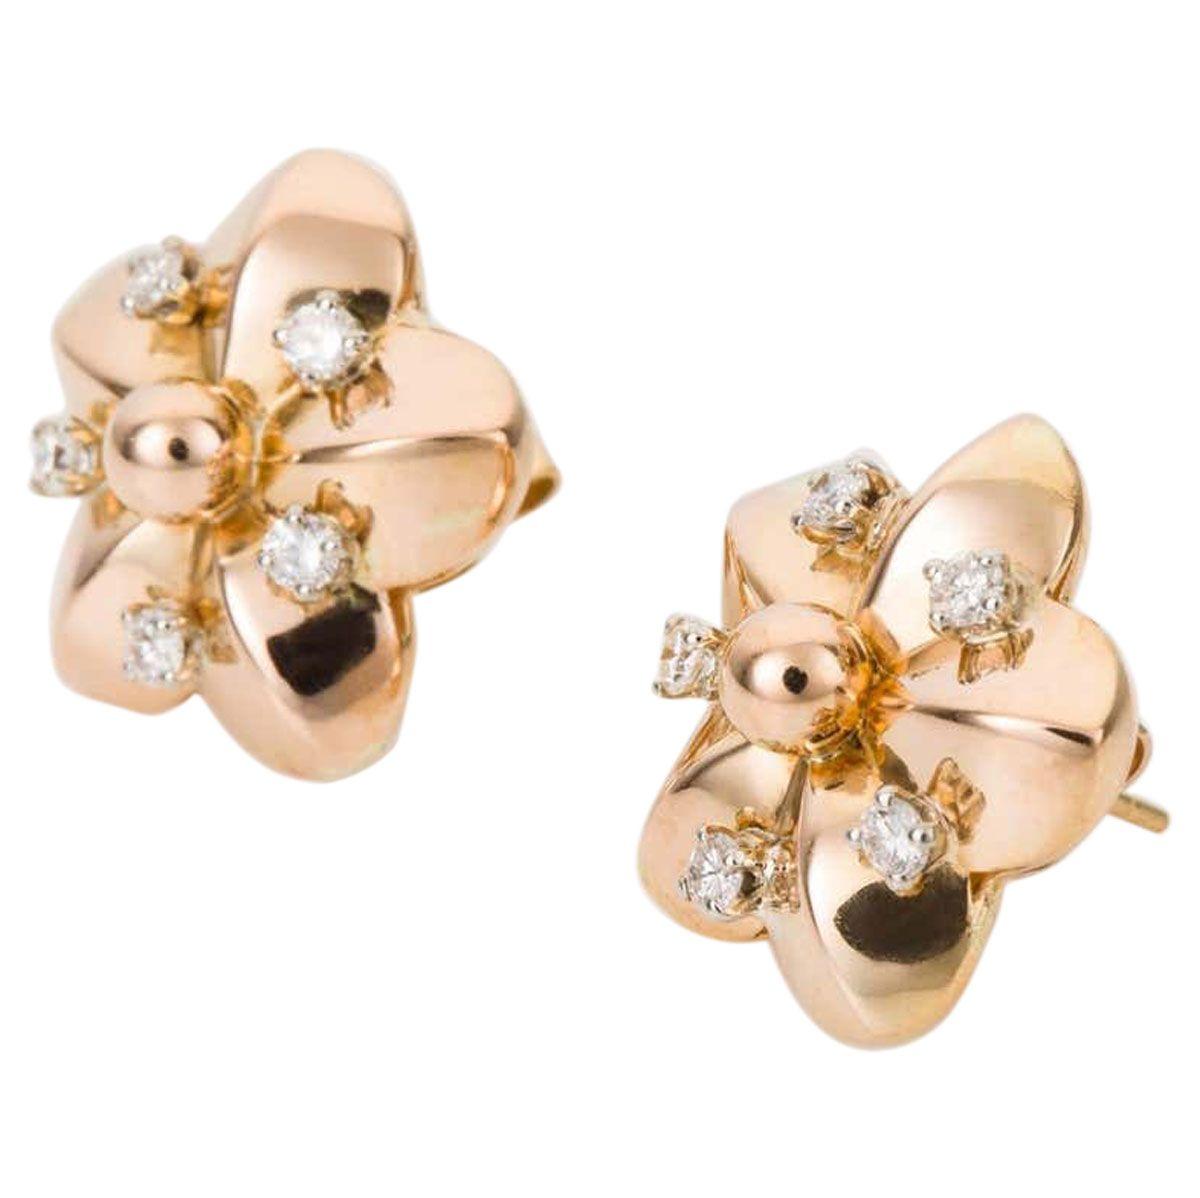 Flowers for your ears! These perfectly pretty 18k yellow gold and diamond earrings sit beautifully on the ears and give a wonderful show. If you love flowers, and who doesn't then these earrings will make you smile. 
Designed as an open style flower